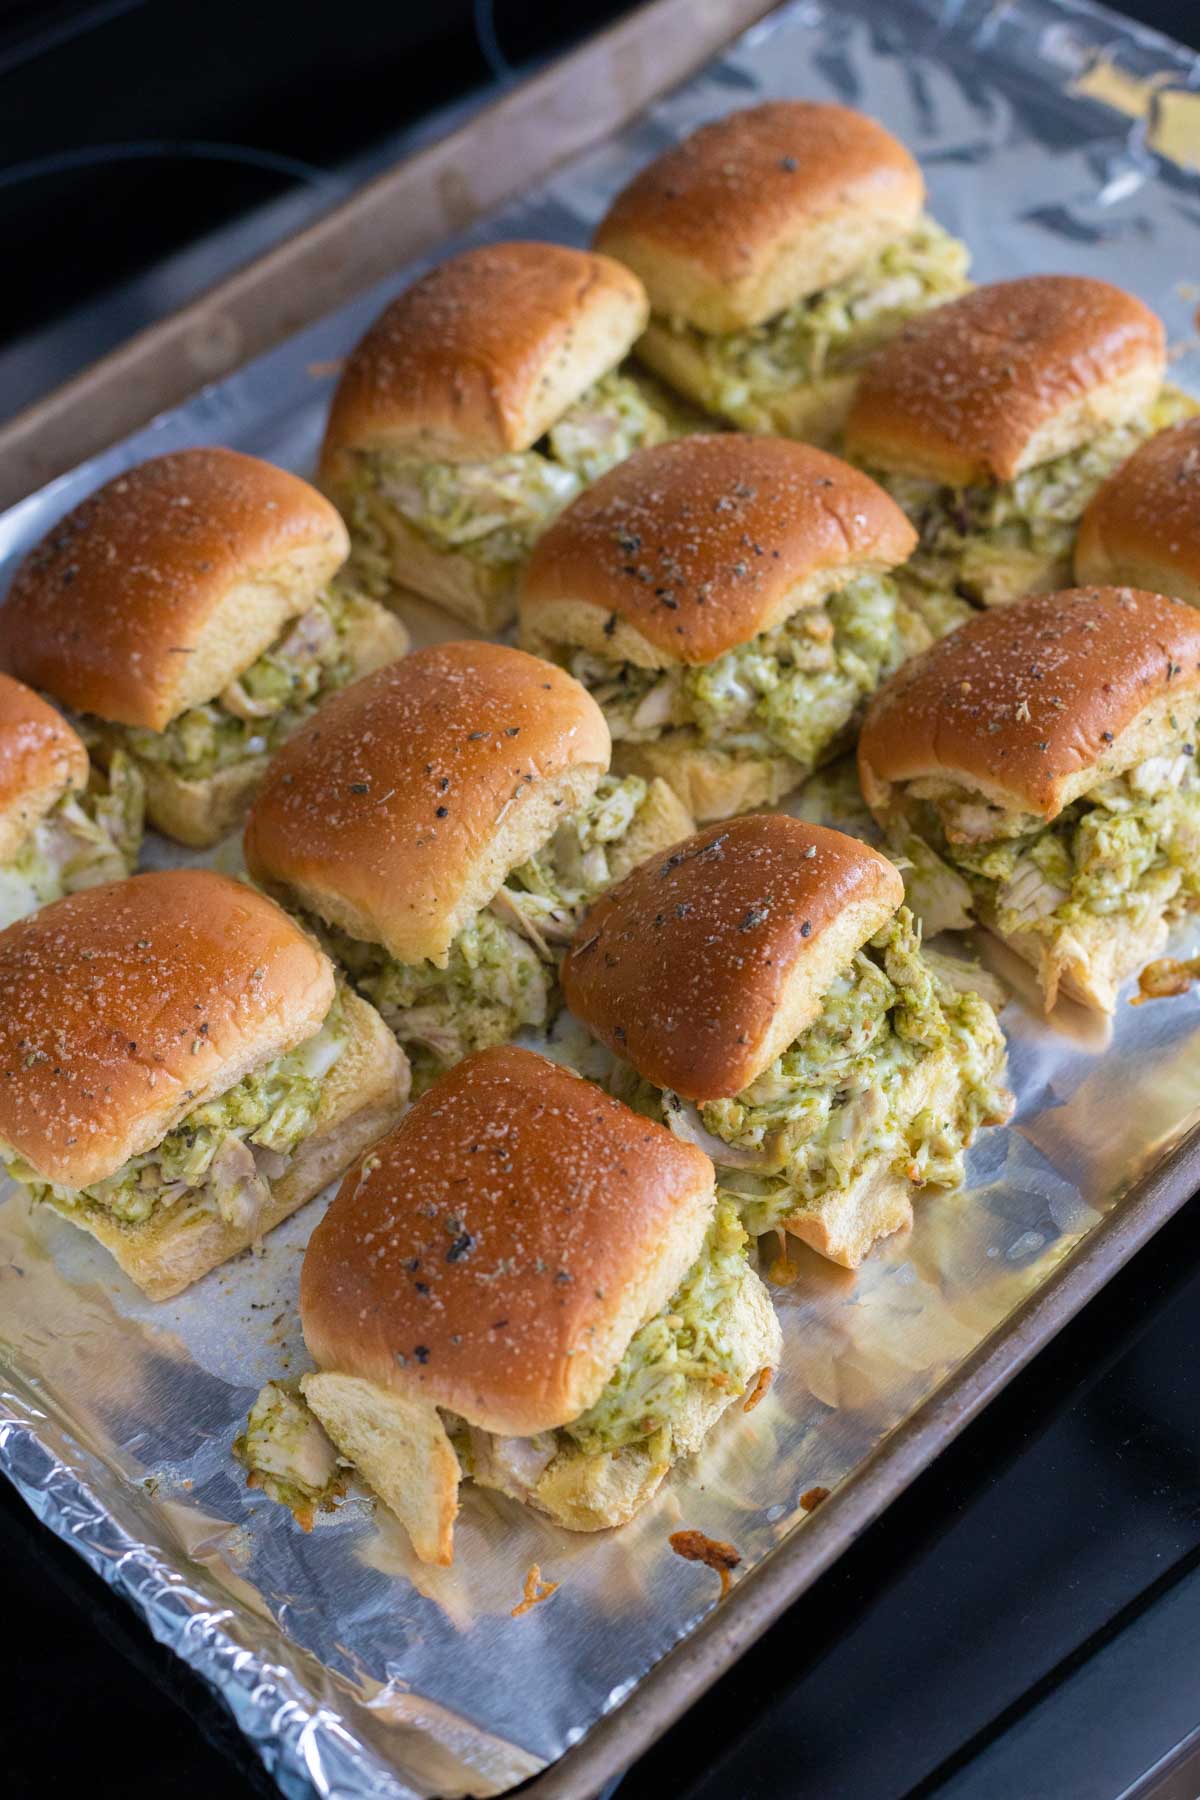 The baking pan of pesto chicken sliders just came out of the oven. The tops are golden brown and the cheese has melted.